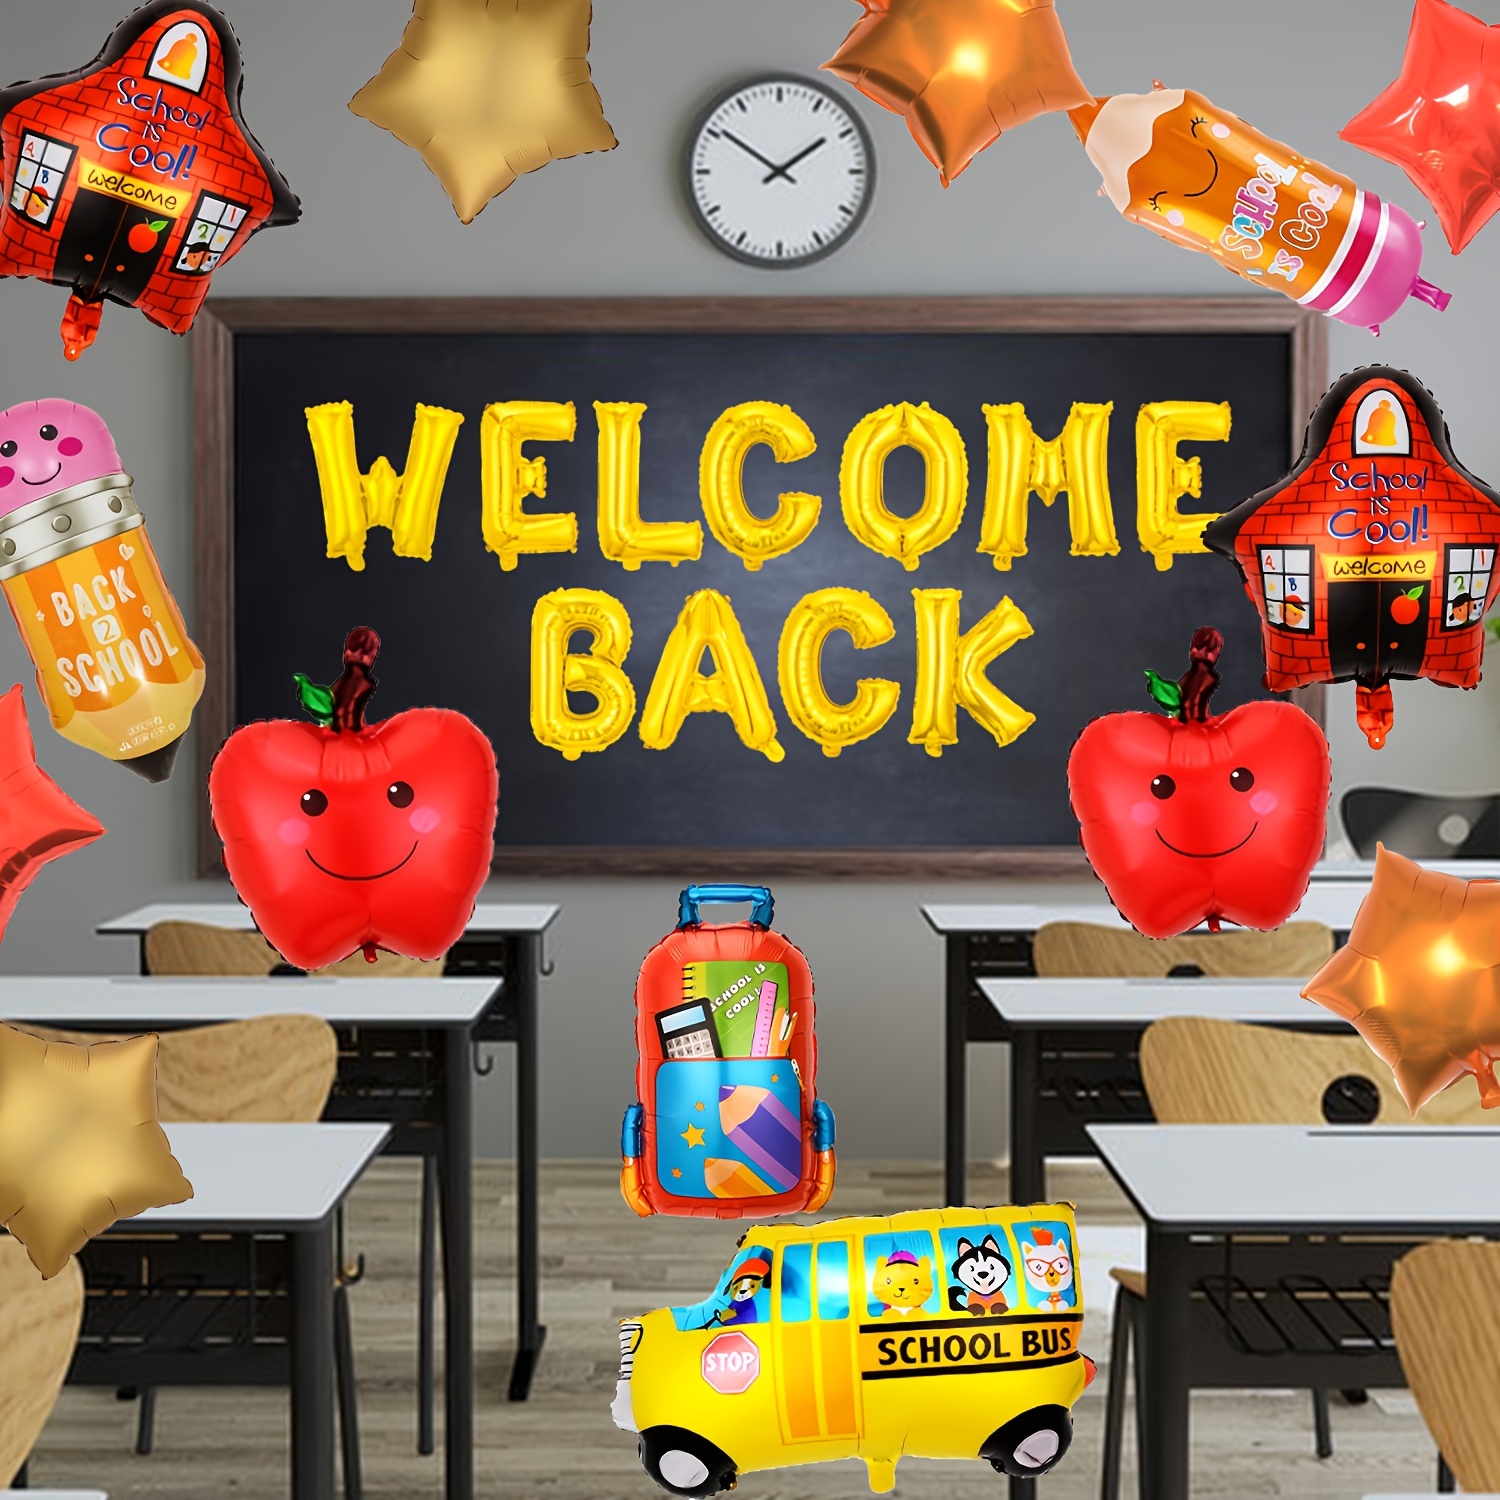 

15pcs Back To School Balloons Party Decorations, Welcome Back To School Bus Balloons Banner First Day Of School Classrooom Party Decorations